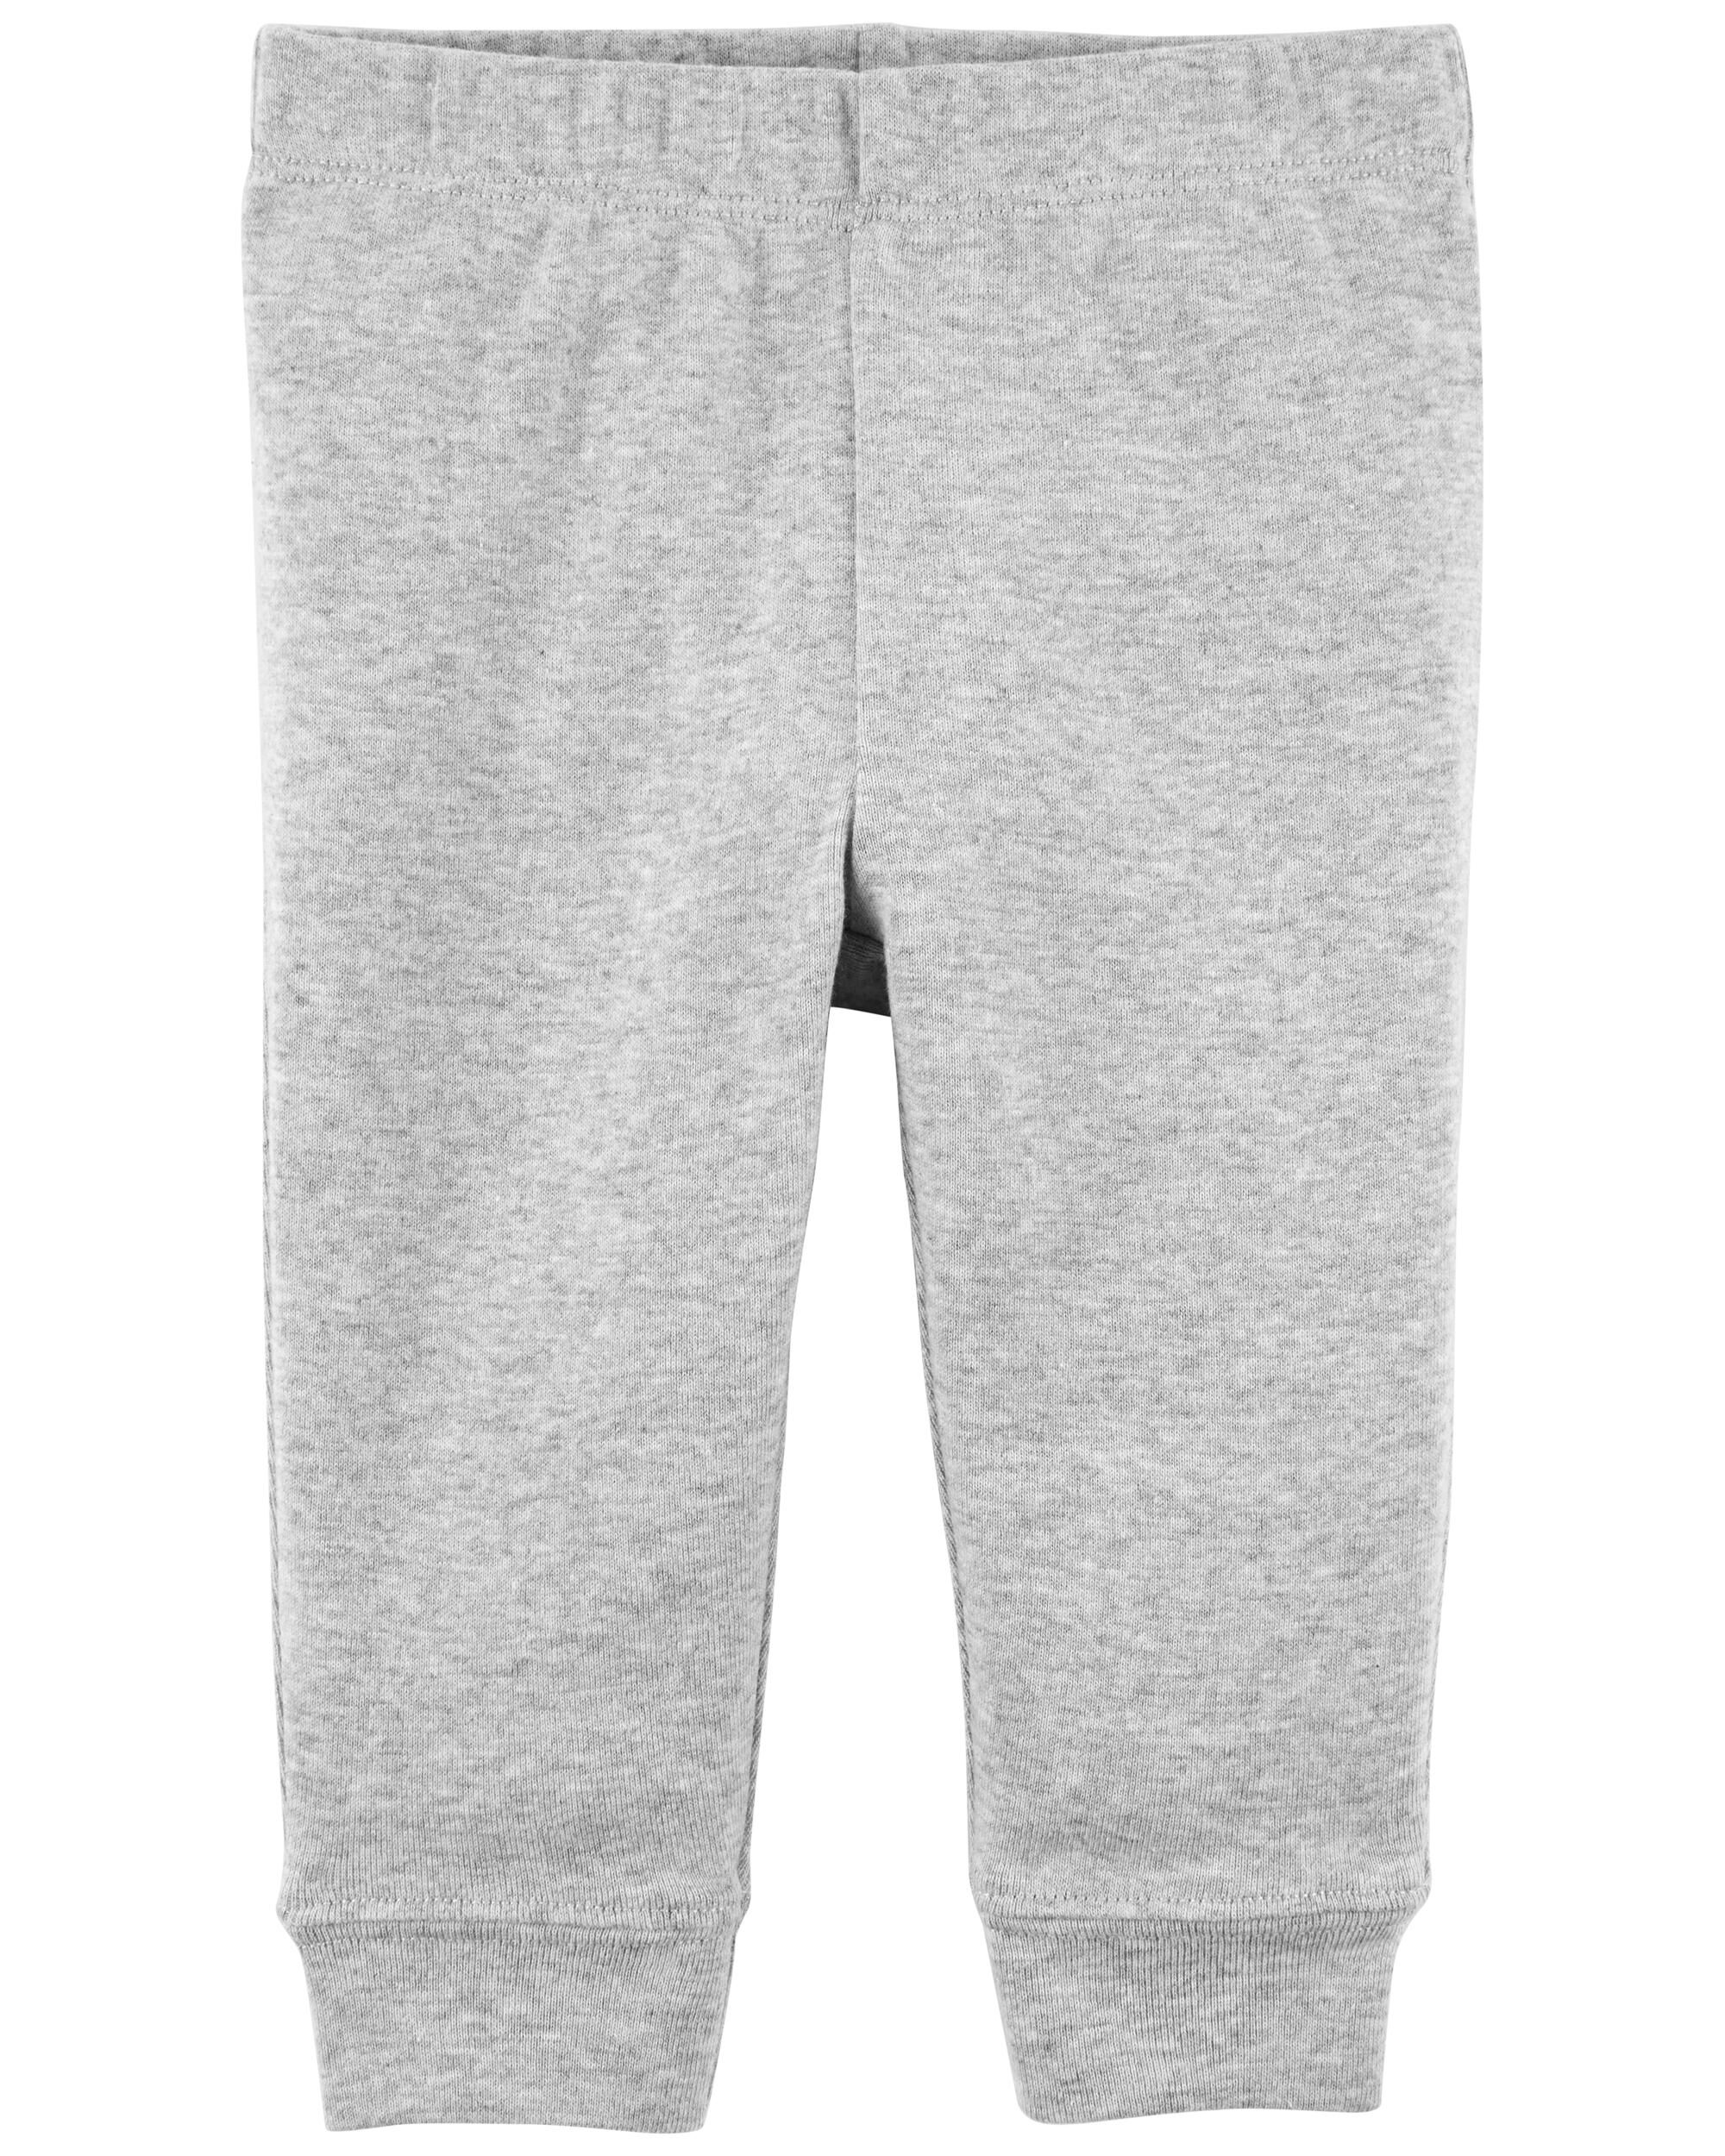 Carters Pull-On Cotton Pants